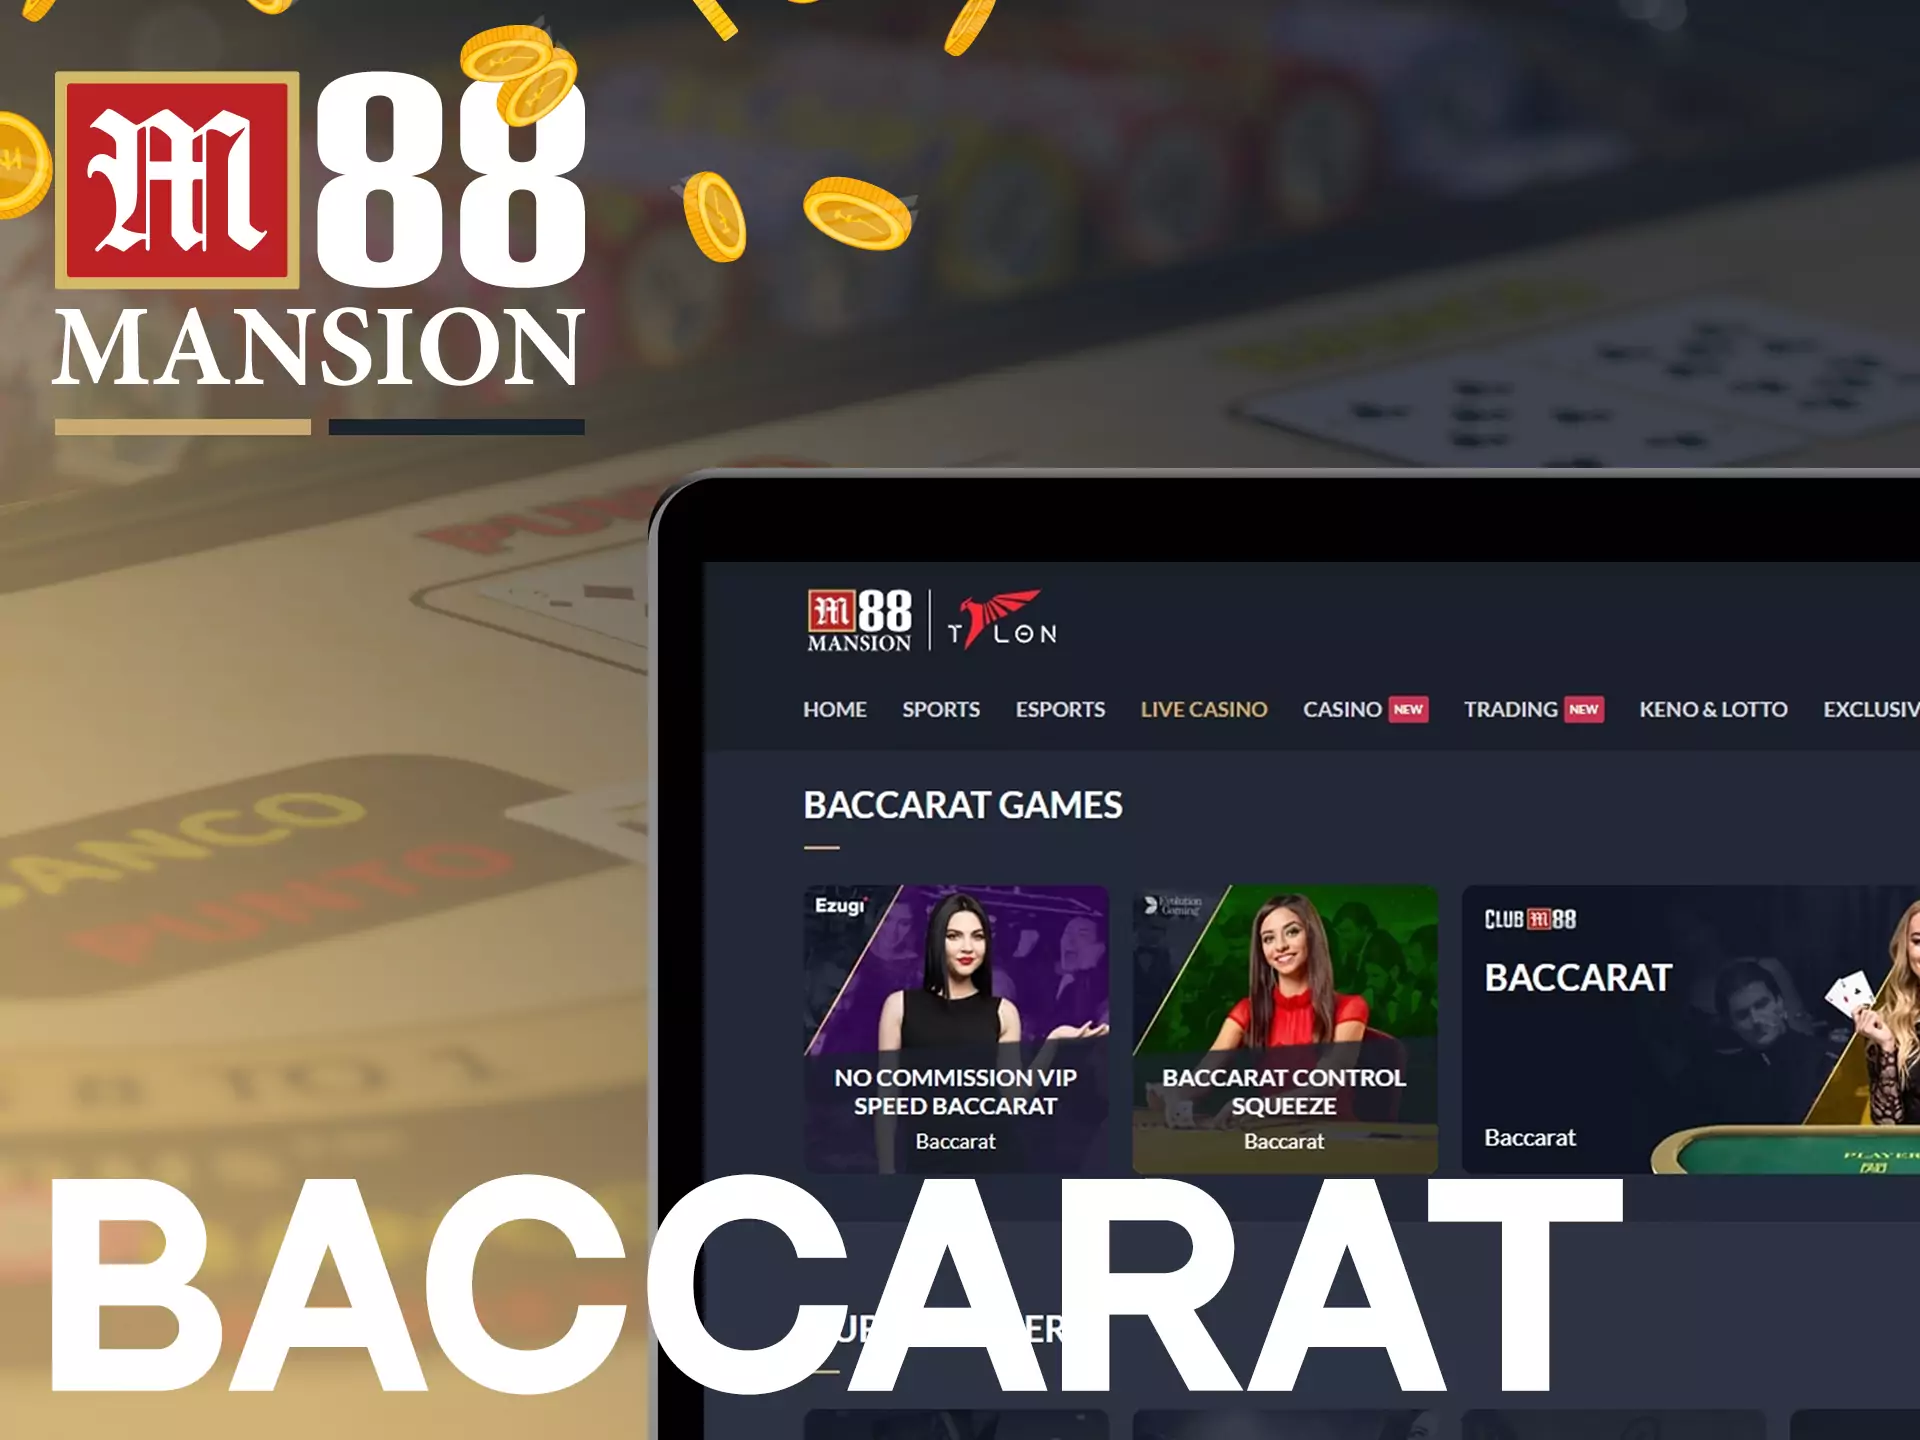 Baccarat is a traditional card game highly presented on the M88 site.